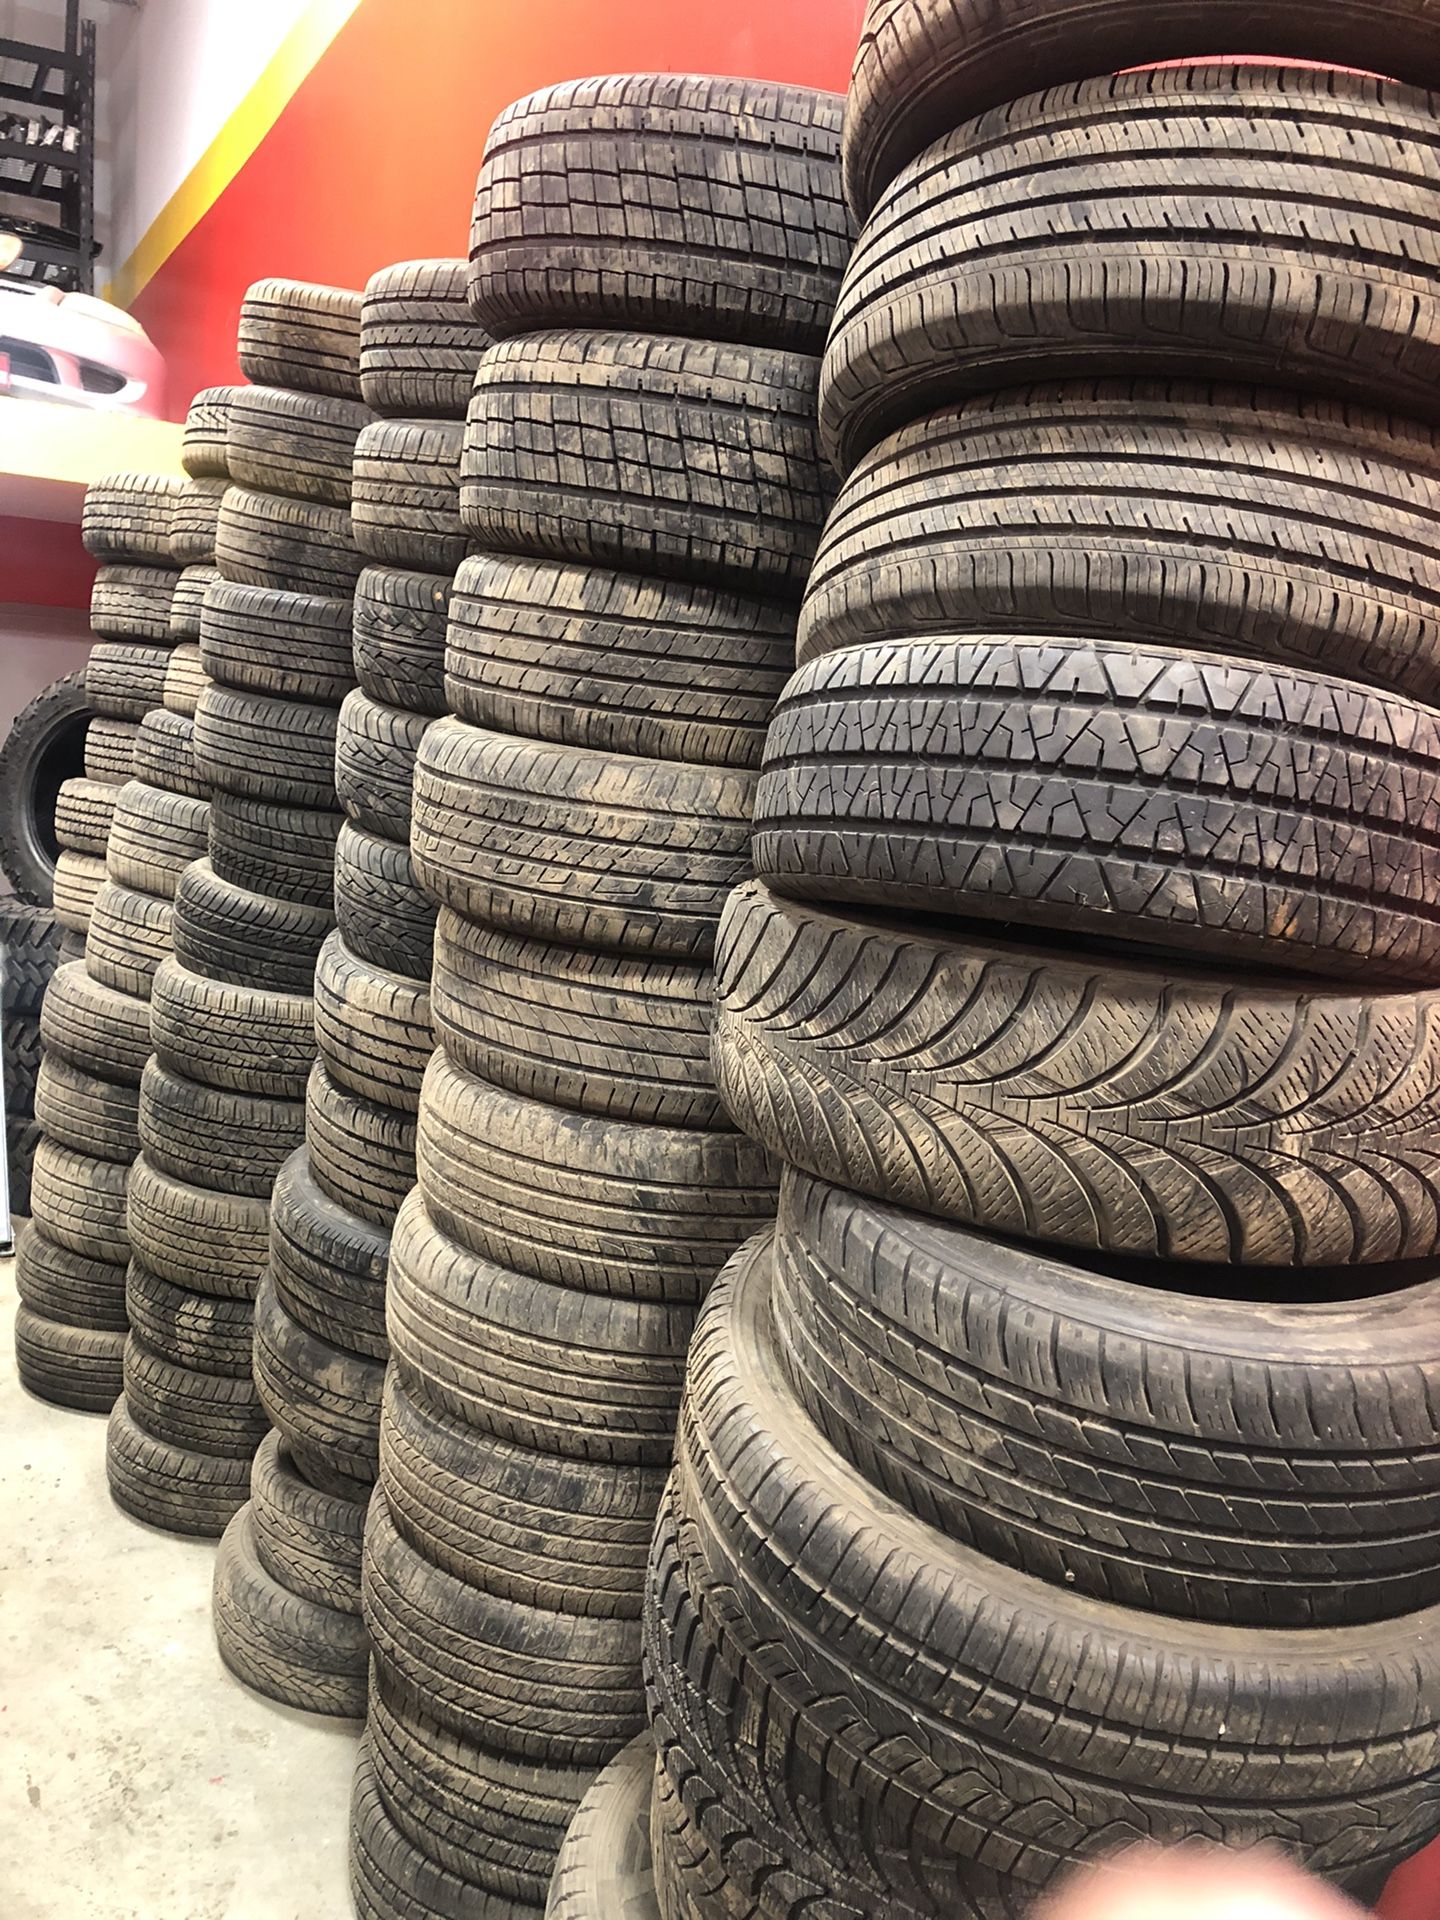 Singles and pairs of used tires like new from $30 dollars a single tire to the highest price of a set of tires for $200💵 any size!! Ventas al por ma